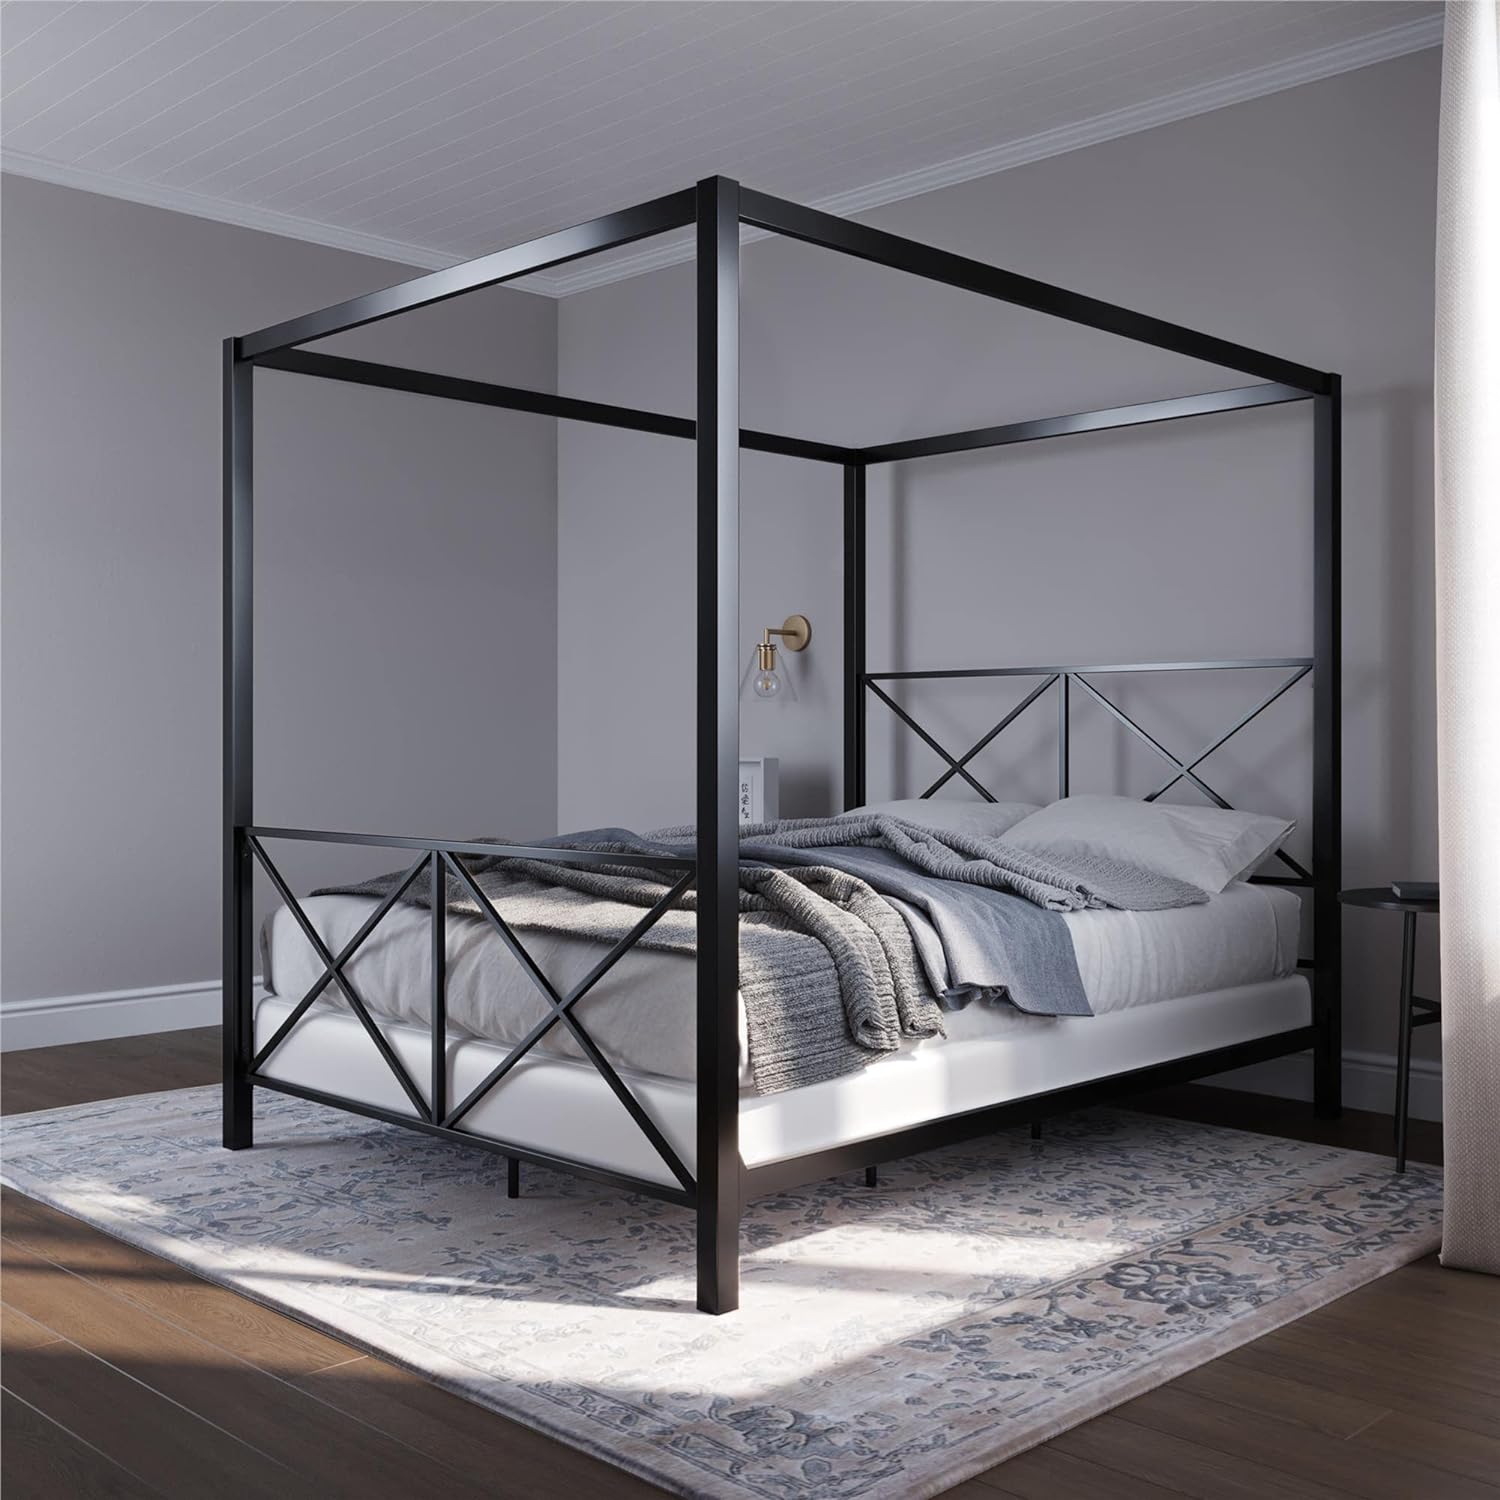 DHP Rosedale Metal Canopy Bed Frame with Four Poster Design and Geometric Accented Headboard and Footboard, Underbed Storage Space, Queen, Black